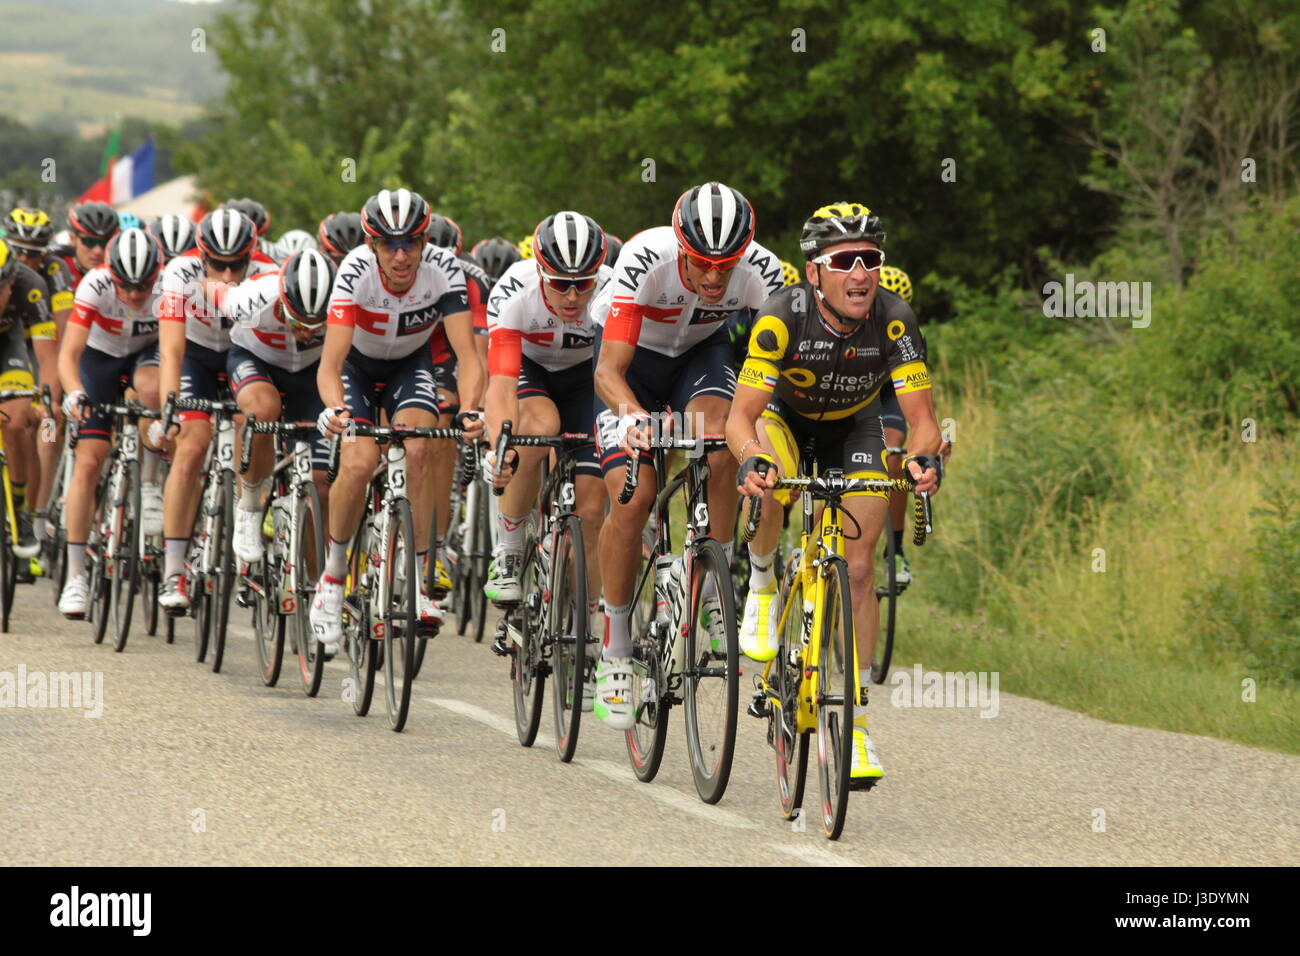 French cyclist Thomas Voeckler leads the breakaway in the Tour de France  Stock Photo - Alamy